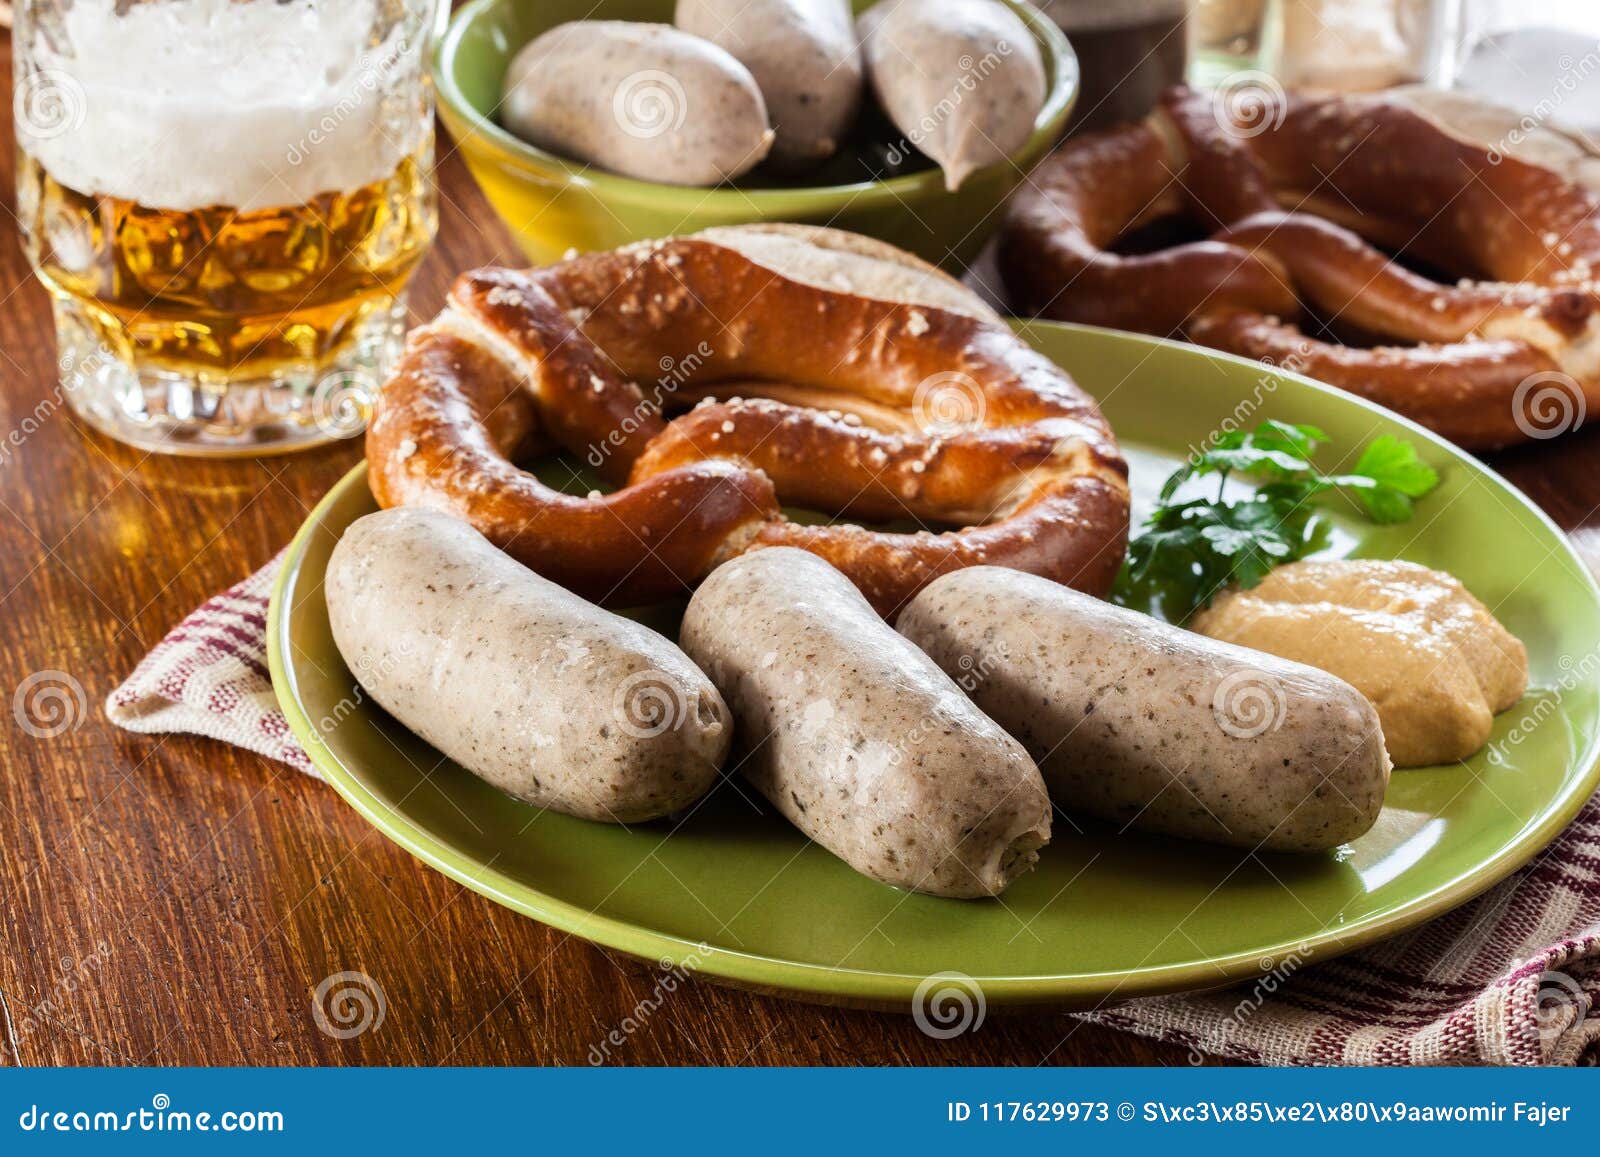 Bavarian Breakfast With White Sausage Stock Image Image Of Brunch